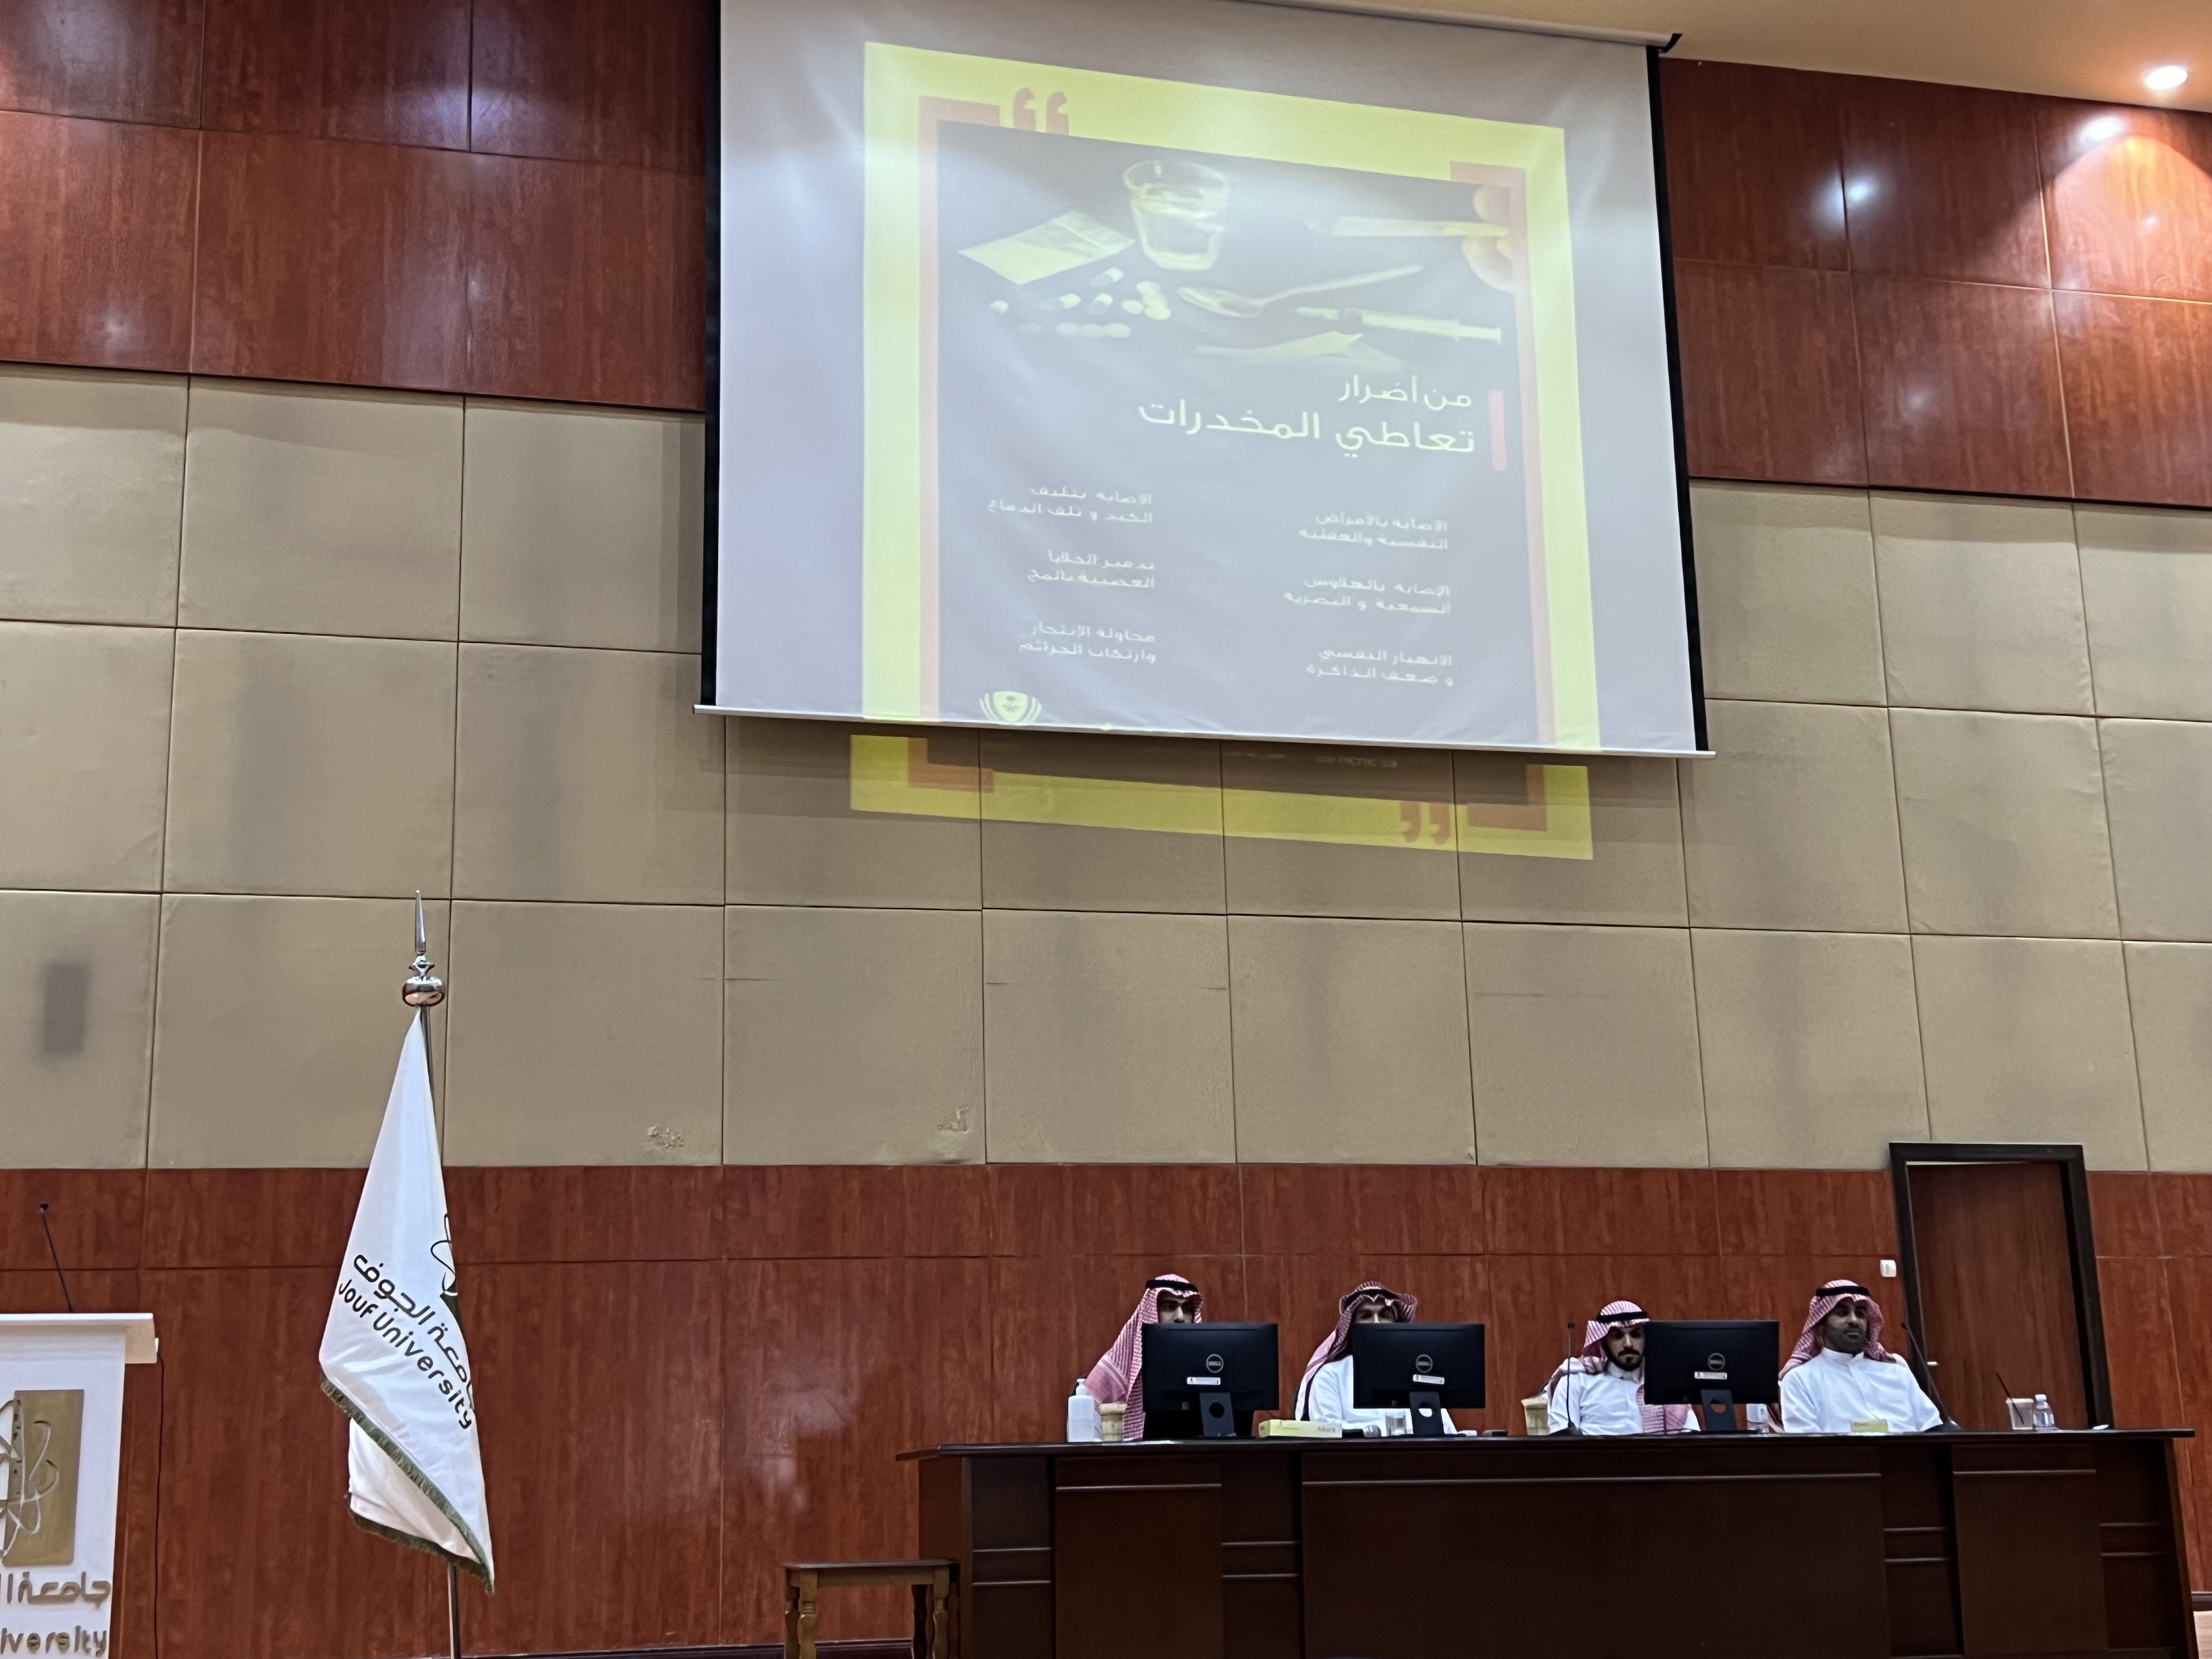 A symposium entitled “Drug damages” in the Girls’ Colleges Complex in Al-Qurayyat